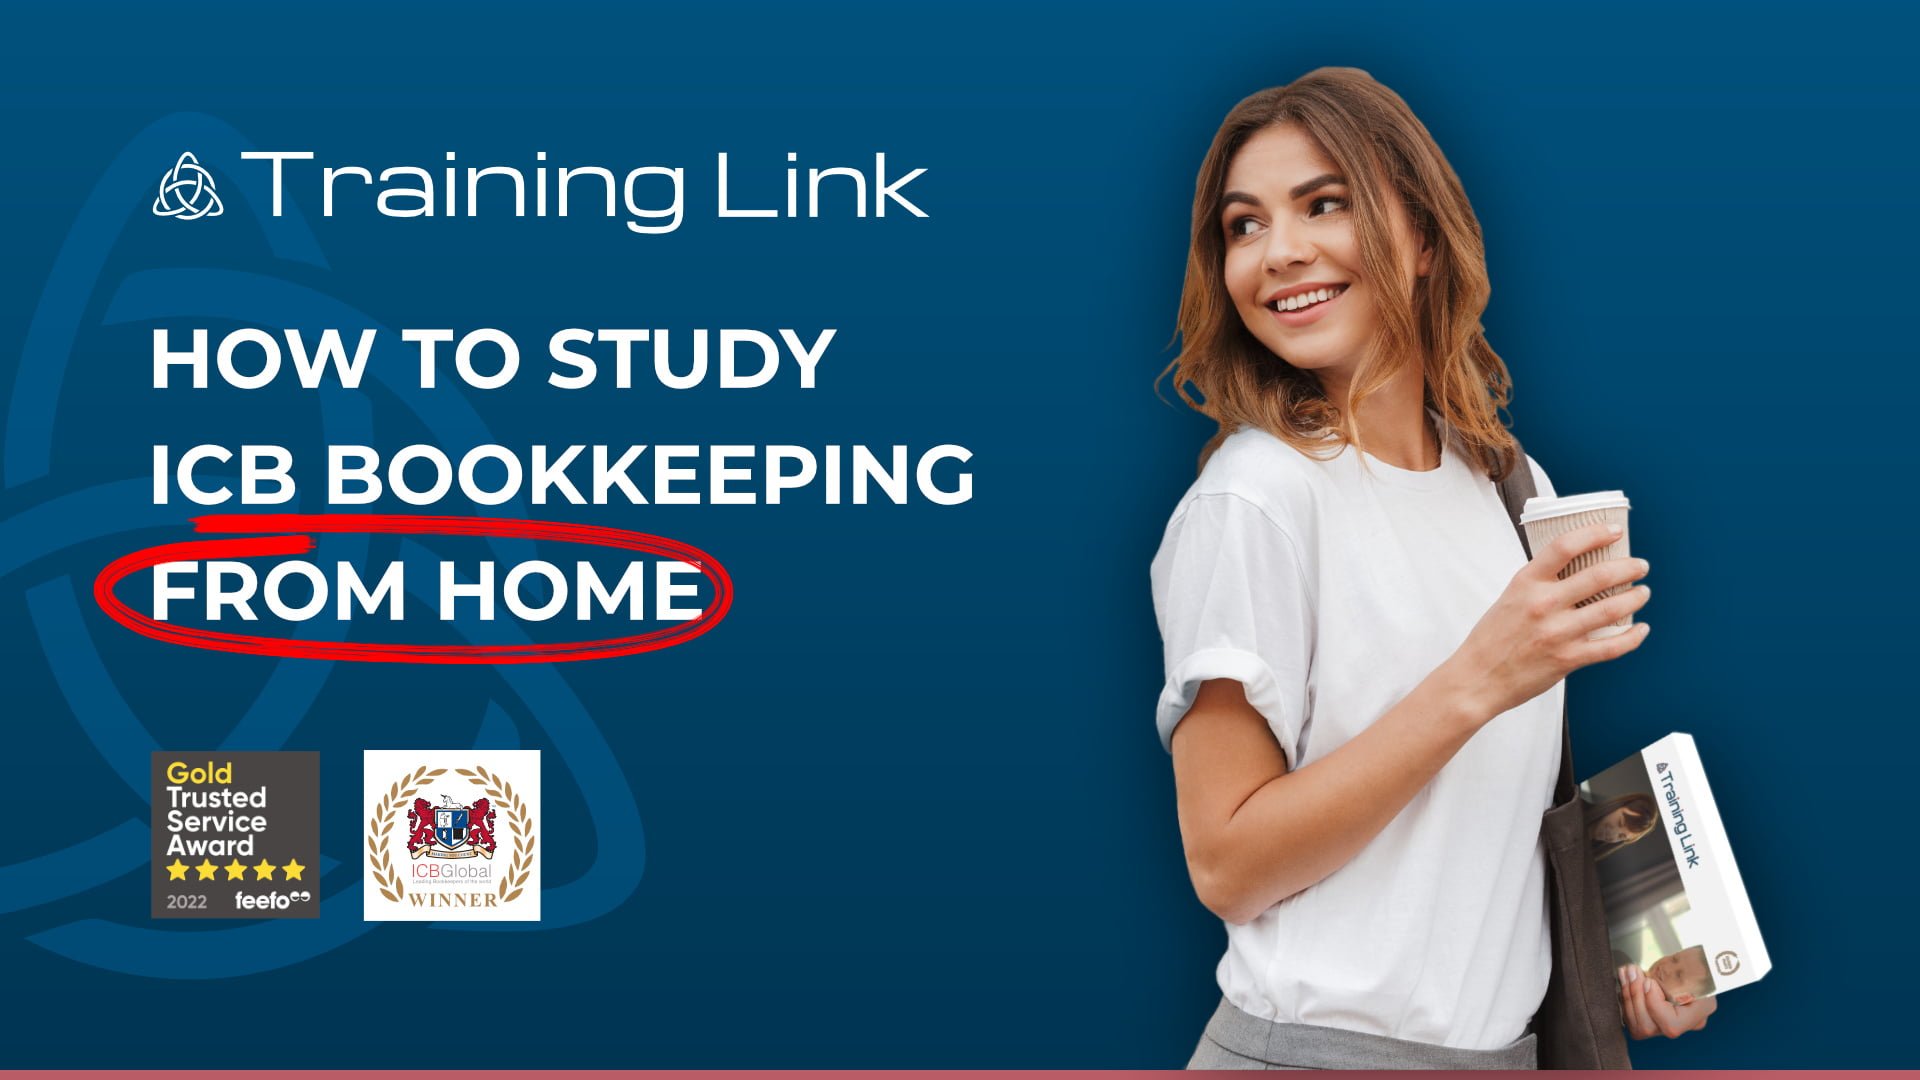 How to study ICB Bookkeeping from home